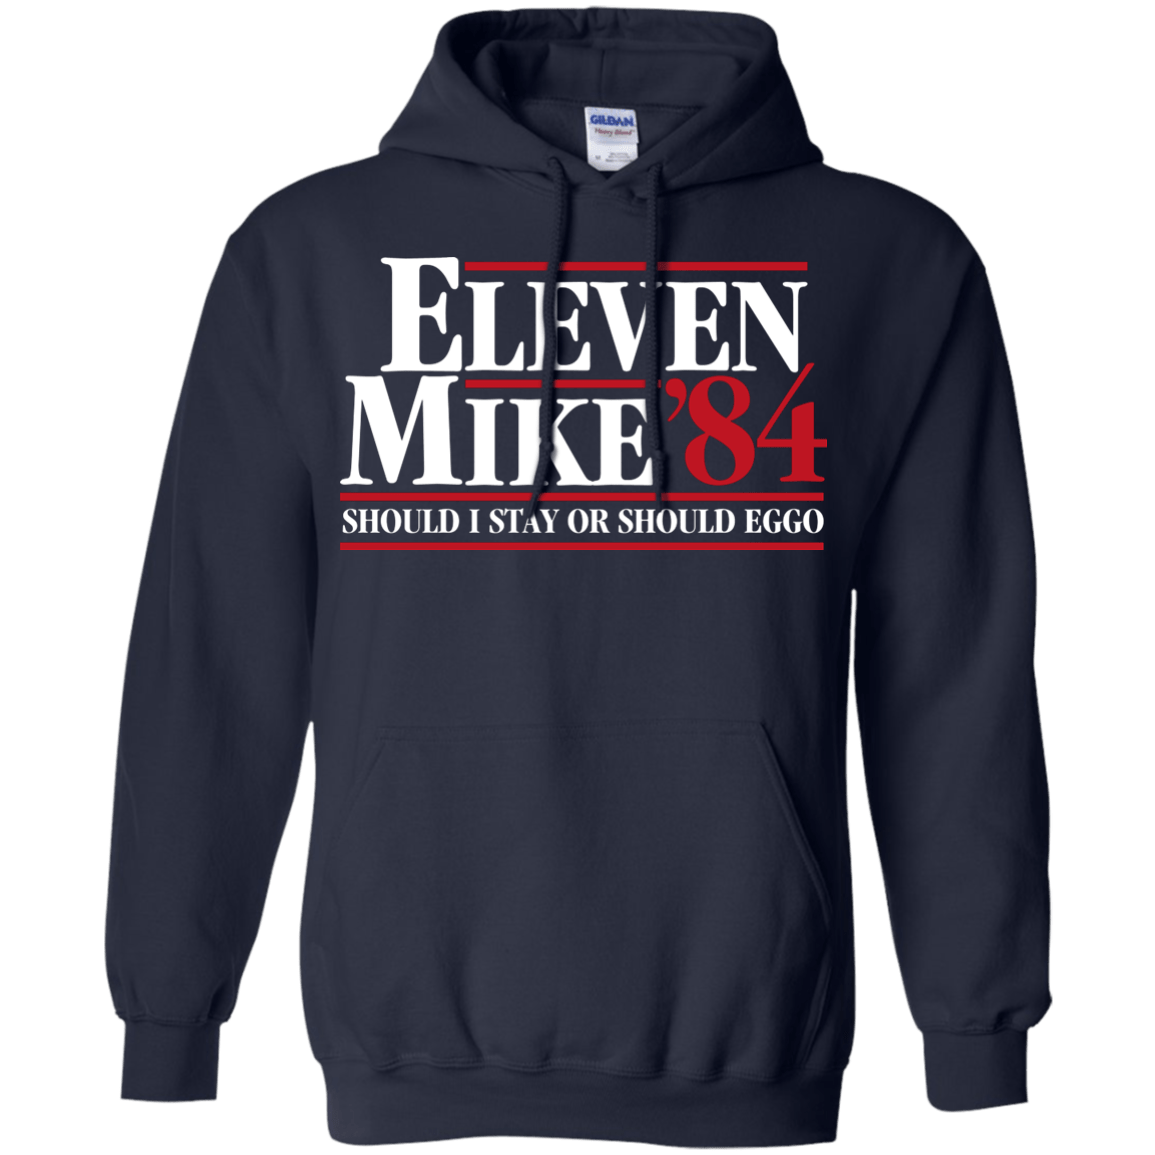 Sweatshirts Navy / Small Eleven Mike 84 - Should I Stay or Should Eggo Pullover Hoodie